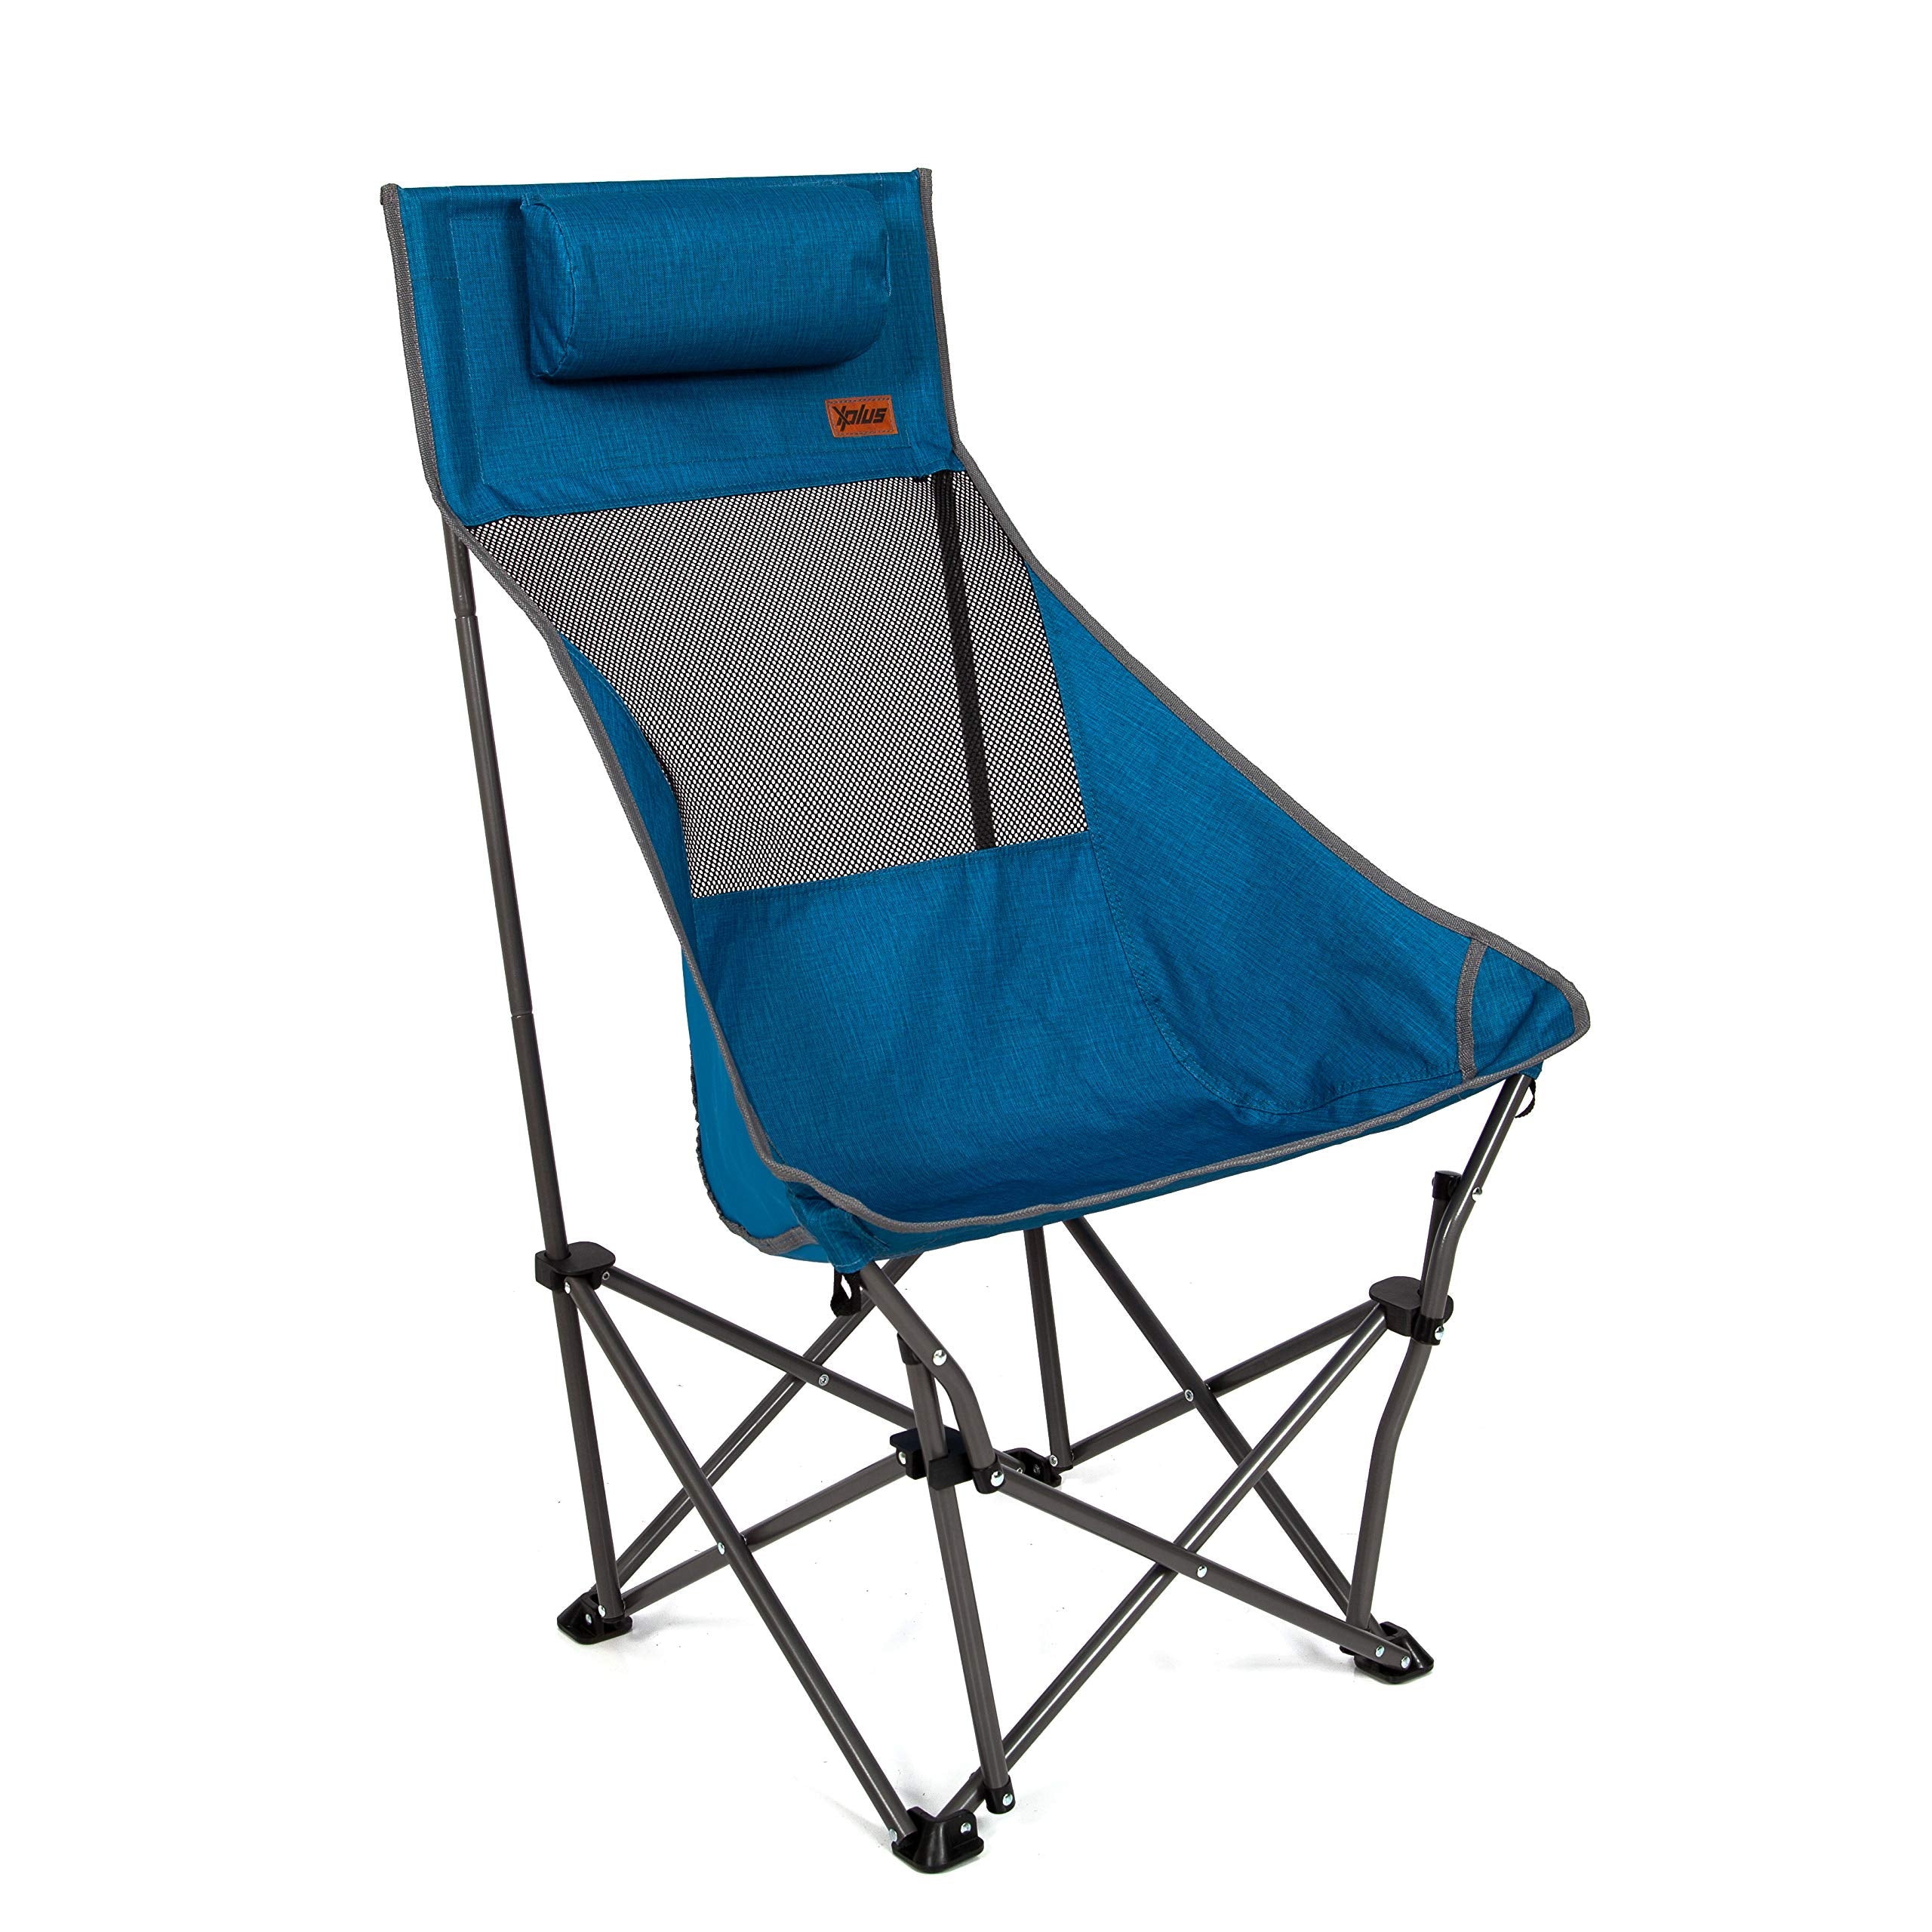 MacSports XP High-Back Folding Camping Chair | Outdoor Back/Lumbar Support, Lightweight (Weighs Under 6lbs), Heavy Duty (Supports 225lbs), for Camping Hiking Gaming Backpacking Sports Hunting (Blue)